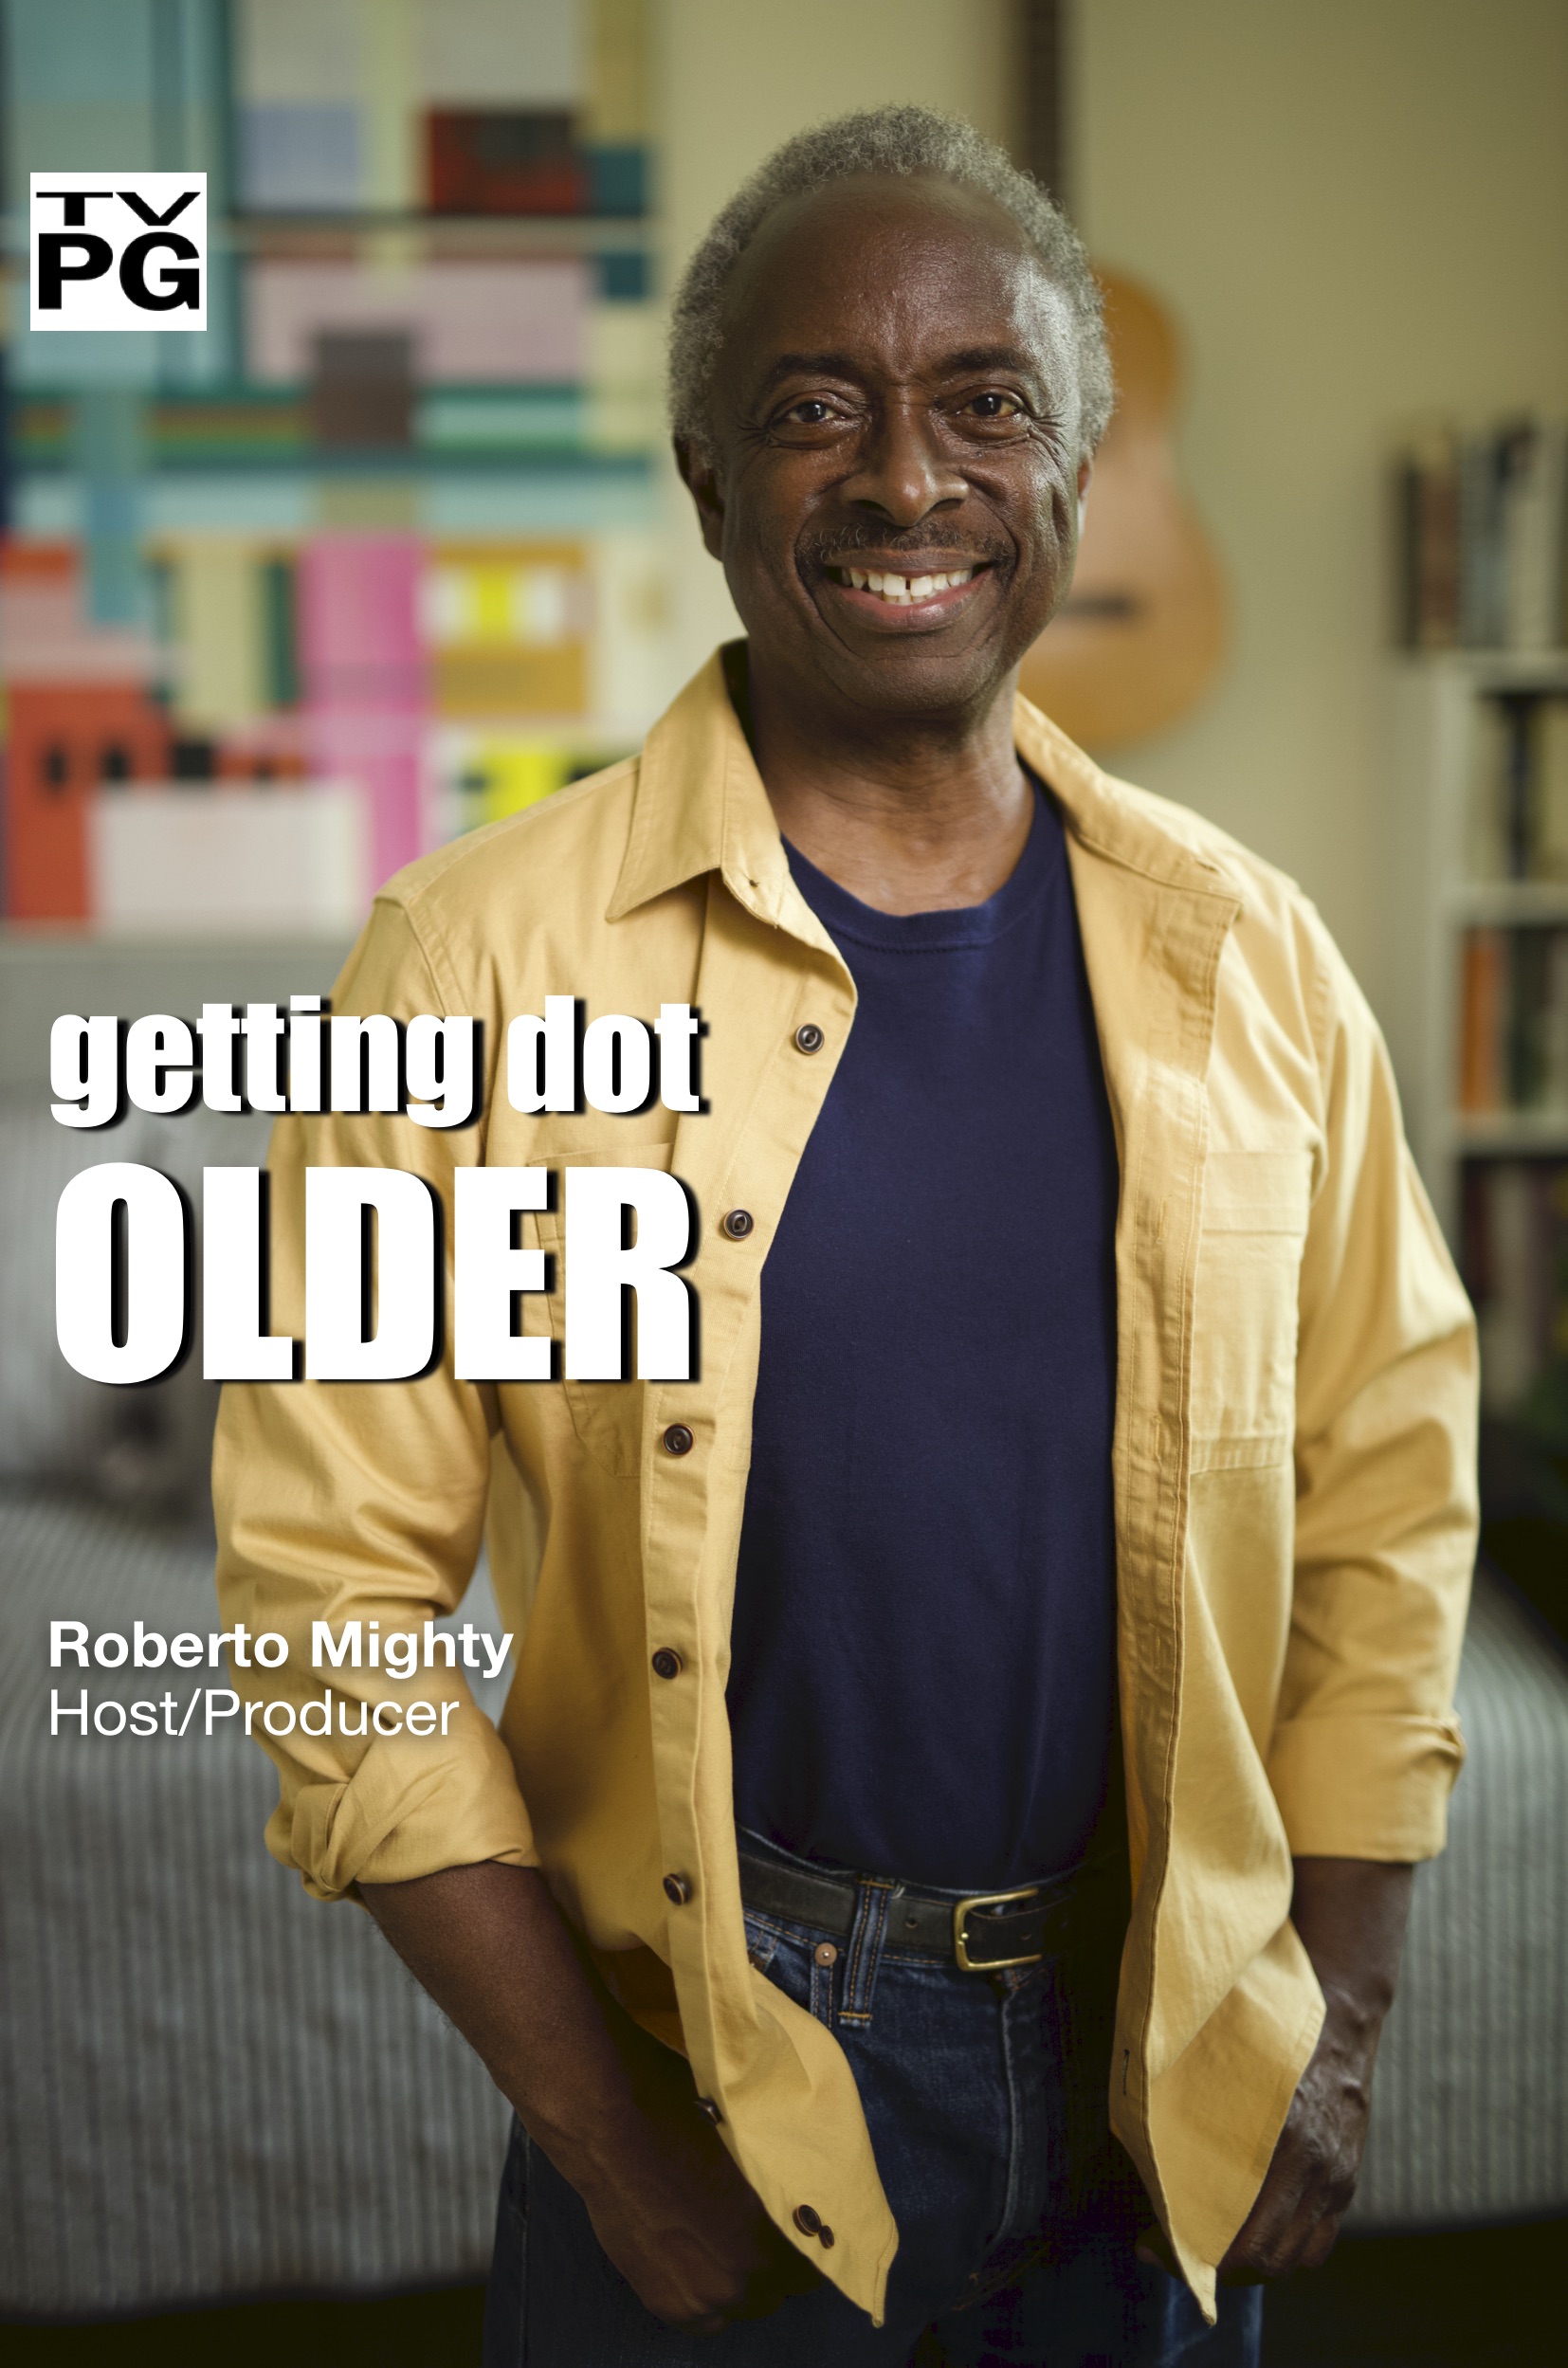 Poster for "getting dot OLDER", new public TV series produced by Celestial Media LLC and distributed by American Public Television. Release: January 1, 2022. Image: Host/Producer Roberto Mighty.